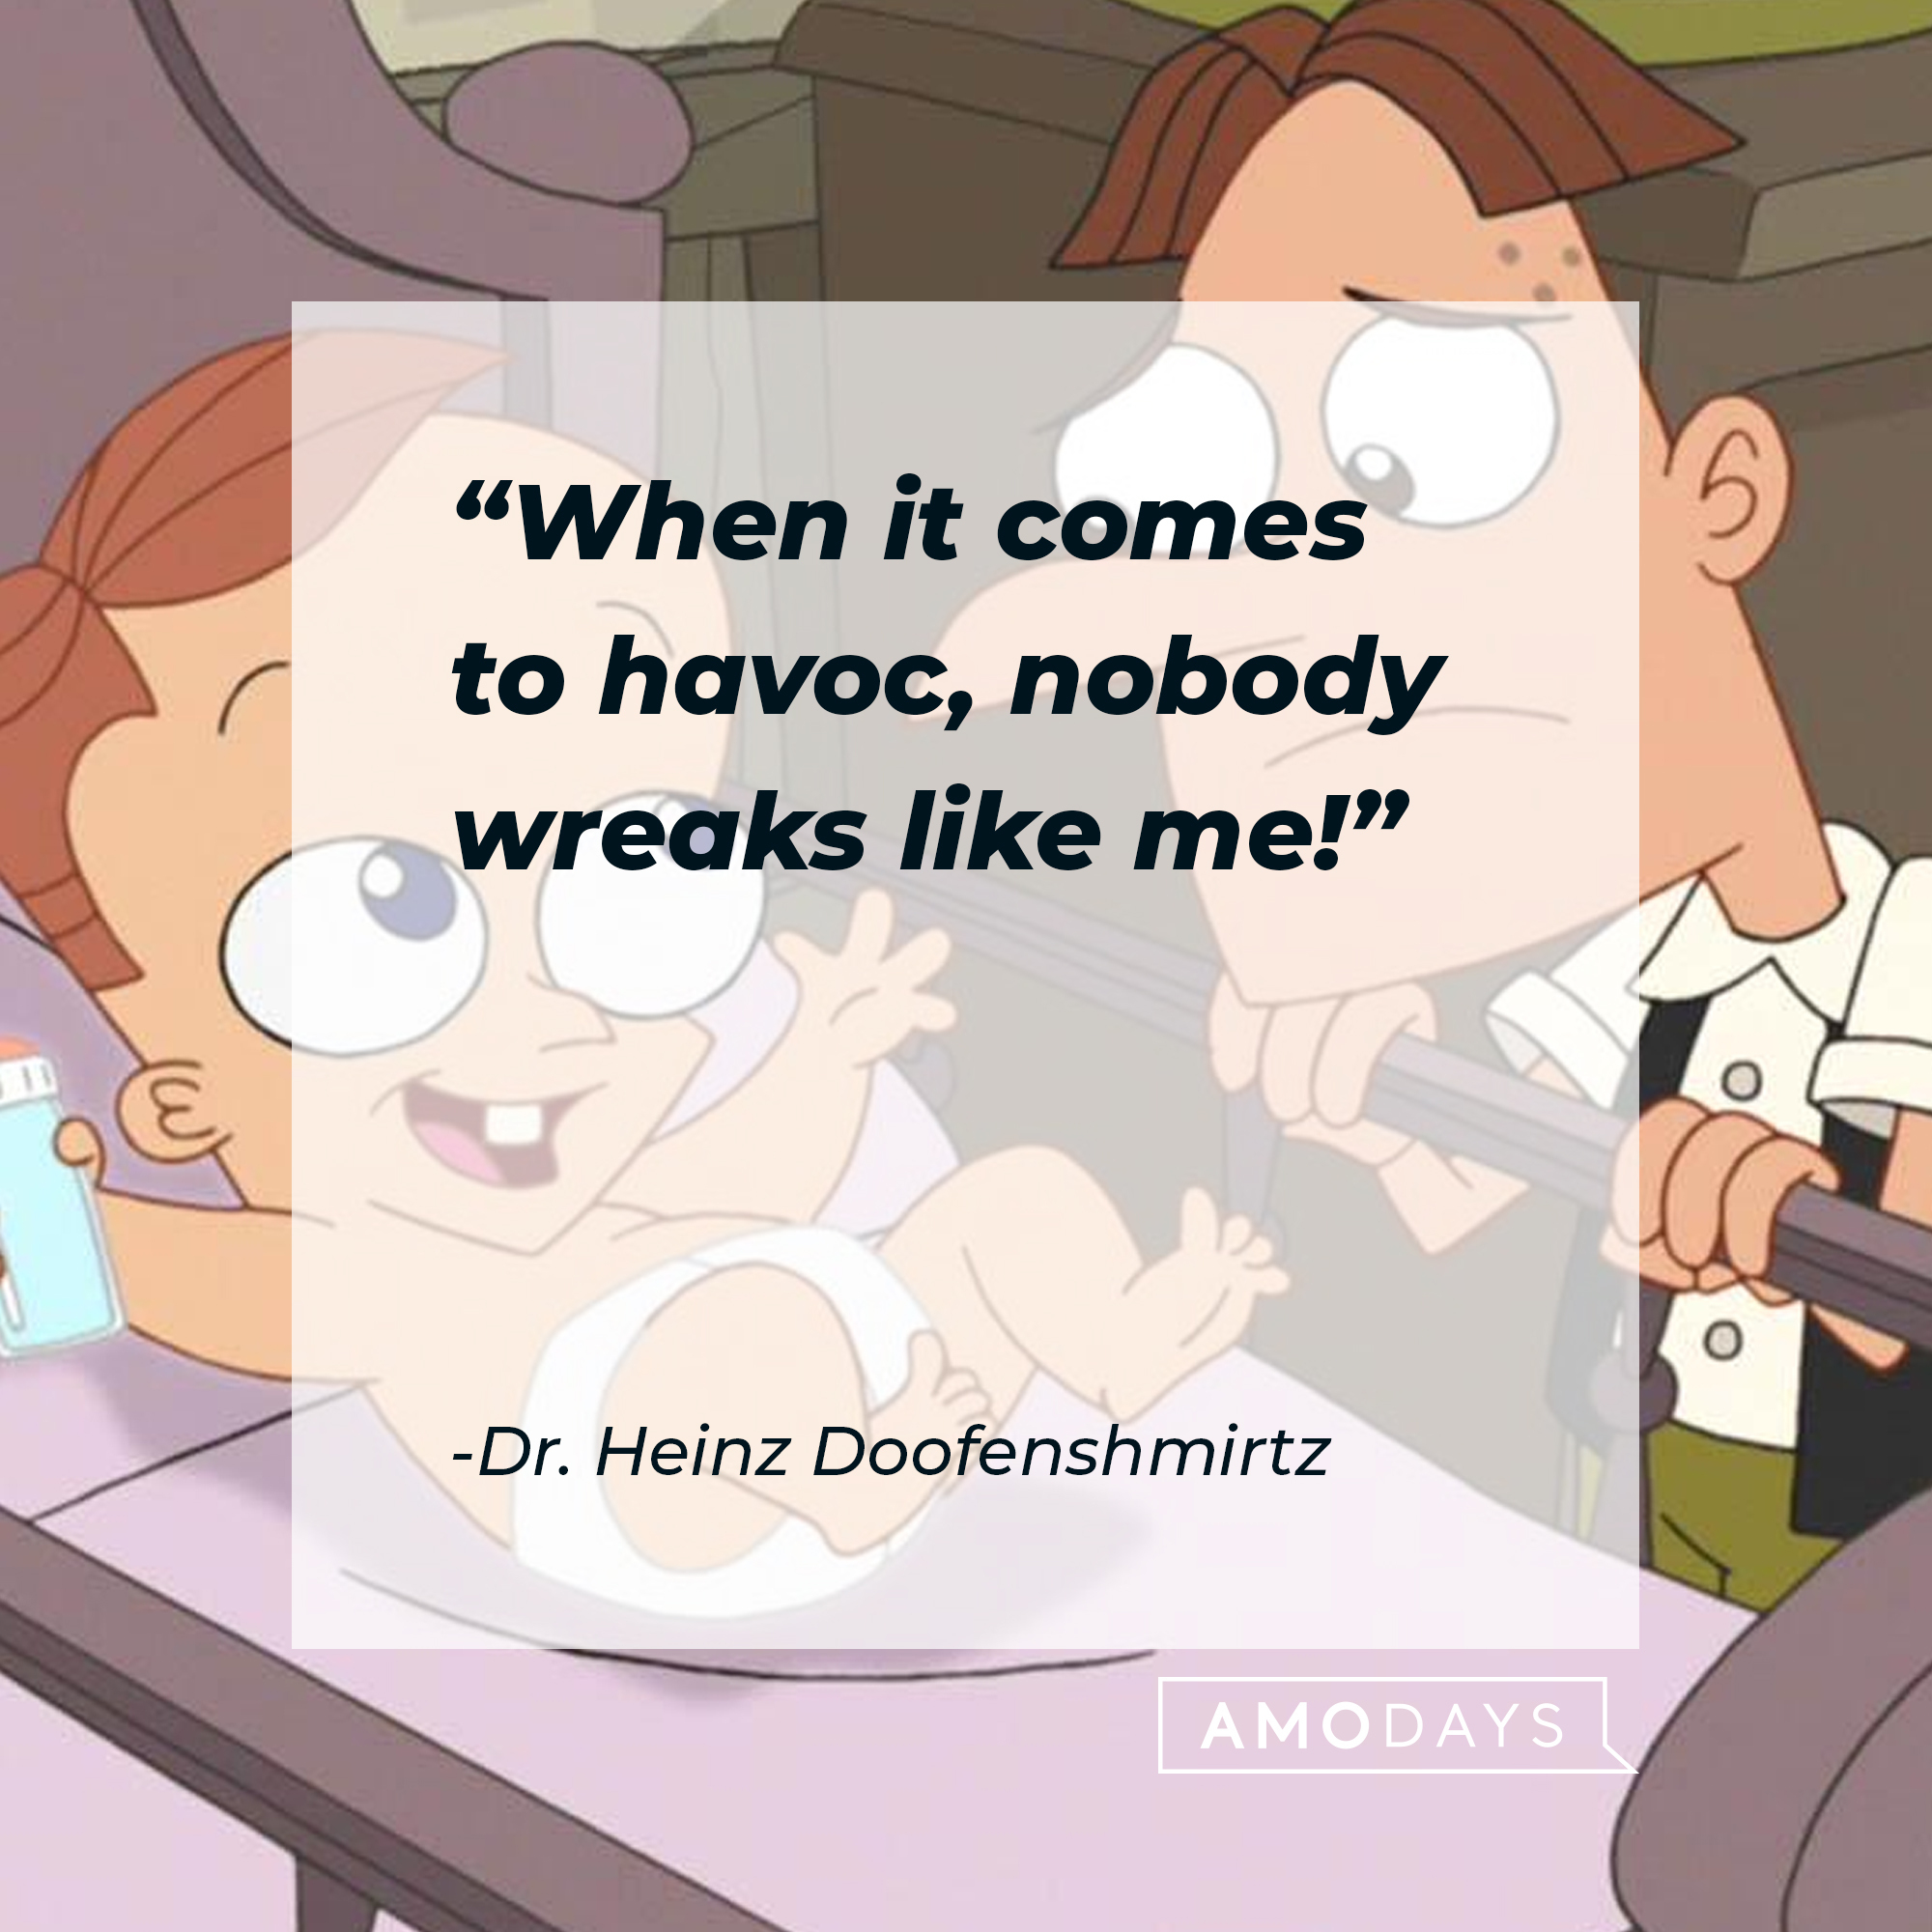 Dr. Heinz Doofenshmirtz's quote: "When it comes to havoc, nobody wreaks like me!" | Source: facebook.com/Phineas-and-Ferb